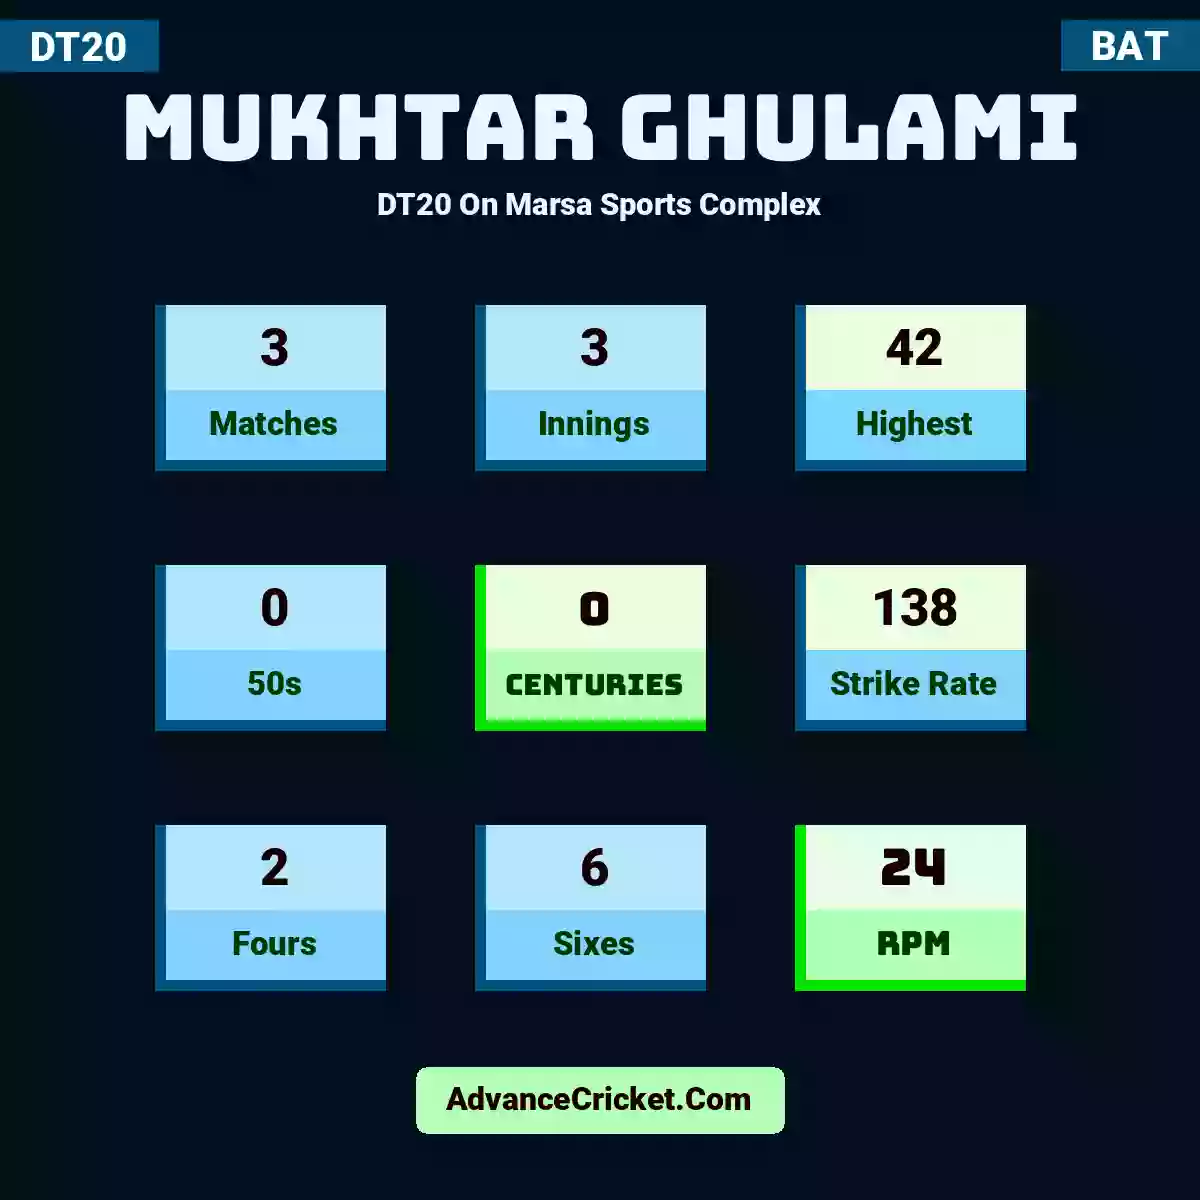 Mukhtar Ghulami DT20  On Marsa Sports Complex, Mukhtar Ghulami played 3 matches, scored 42 runs as highest, 0 half-centuries, and 0 centuries, with a strike rate of 138. M.Ghulami hit 2 fours and 6 sixes, with an RPM of 24.